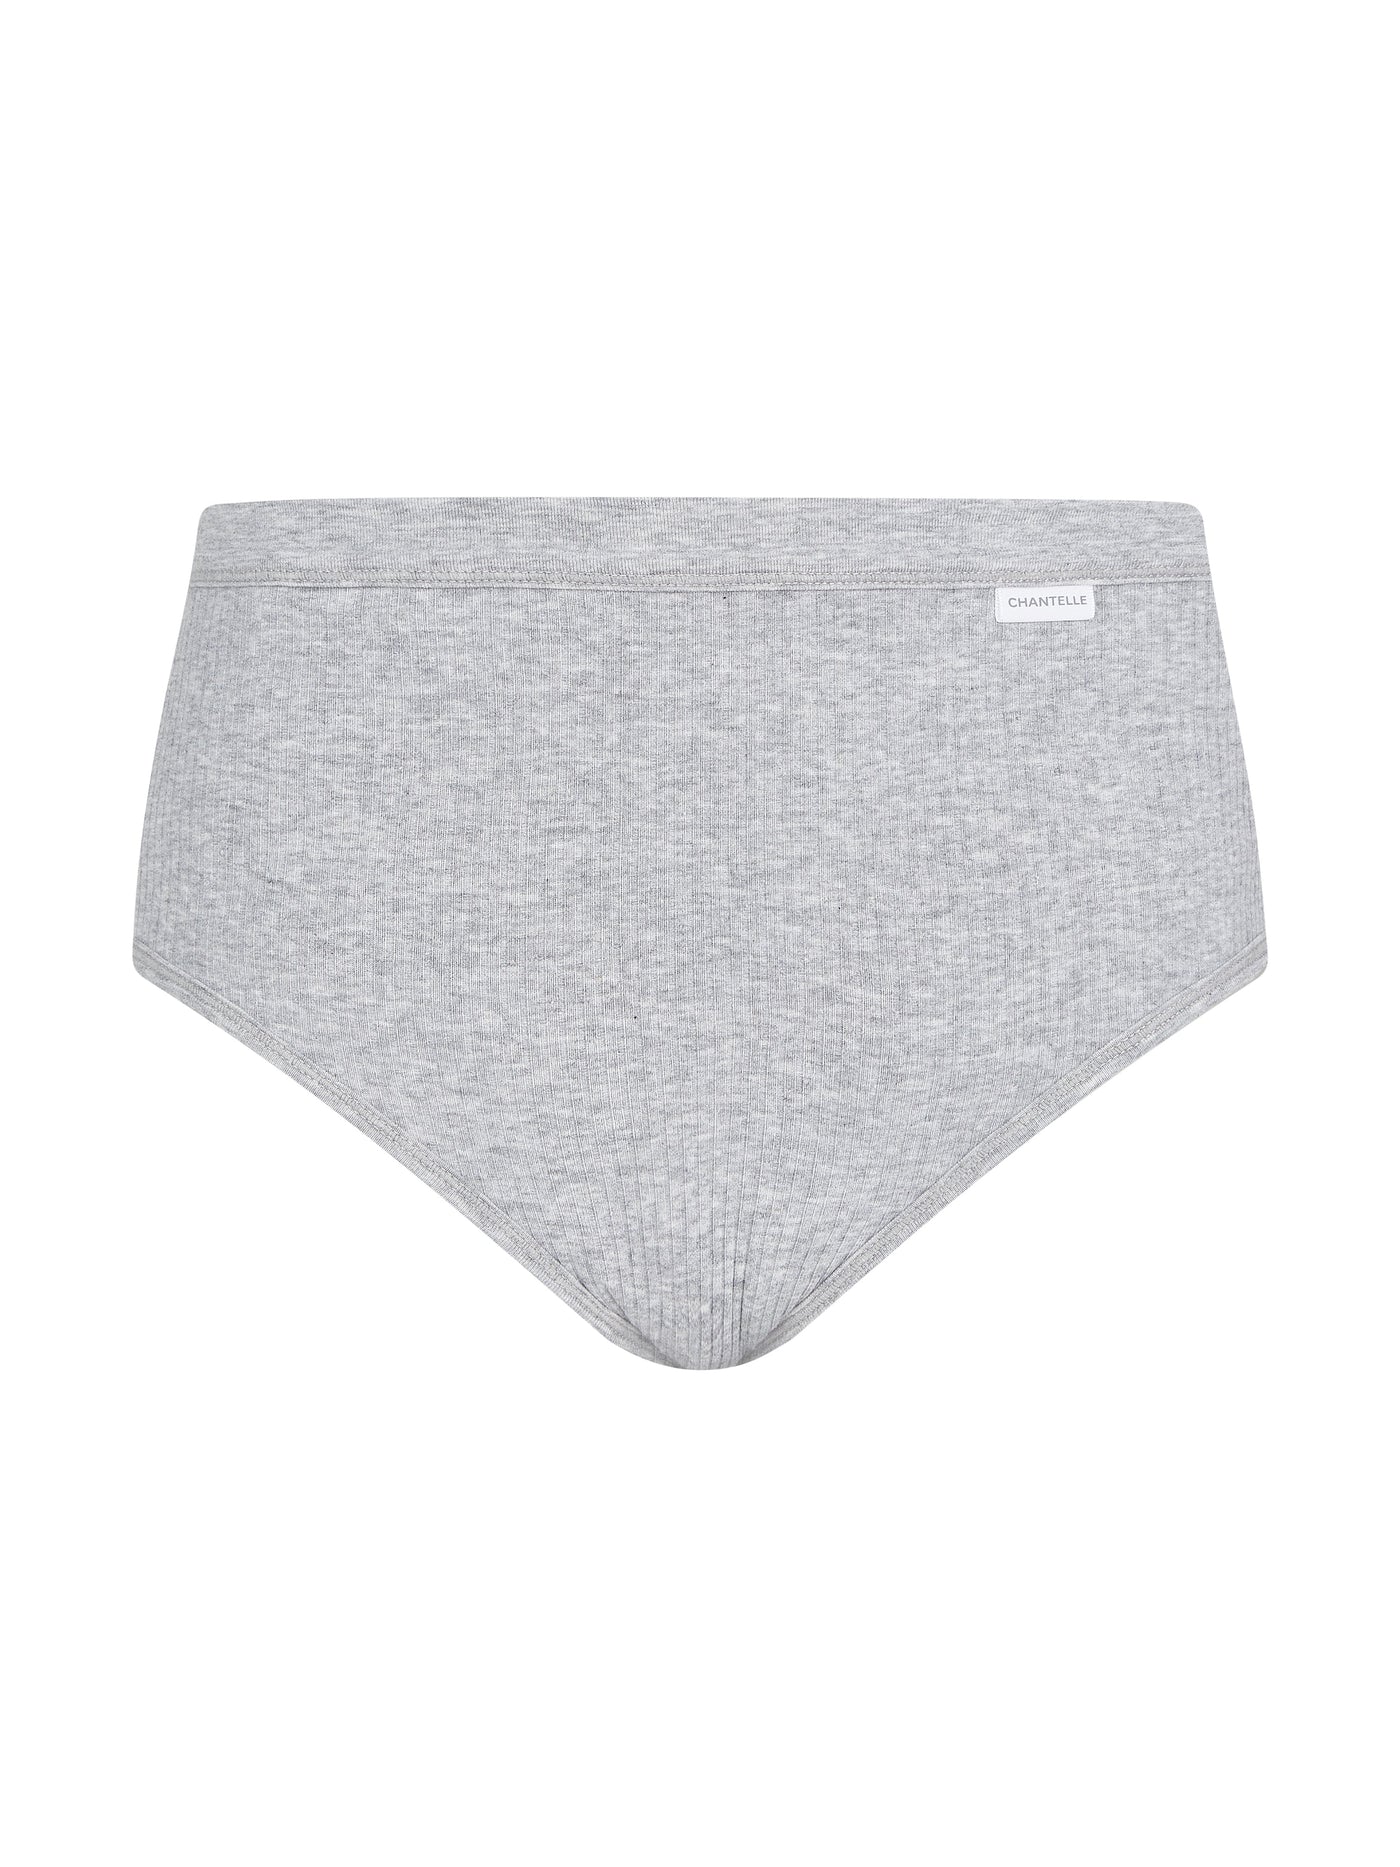 Chantelle Cotton Comfort Full Brief - Mixed Grey Full Brief Chantelle 